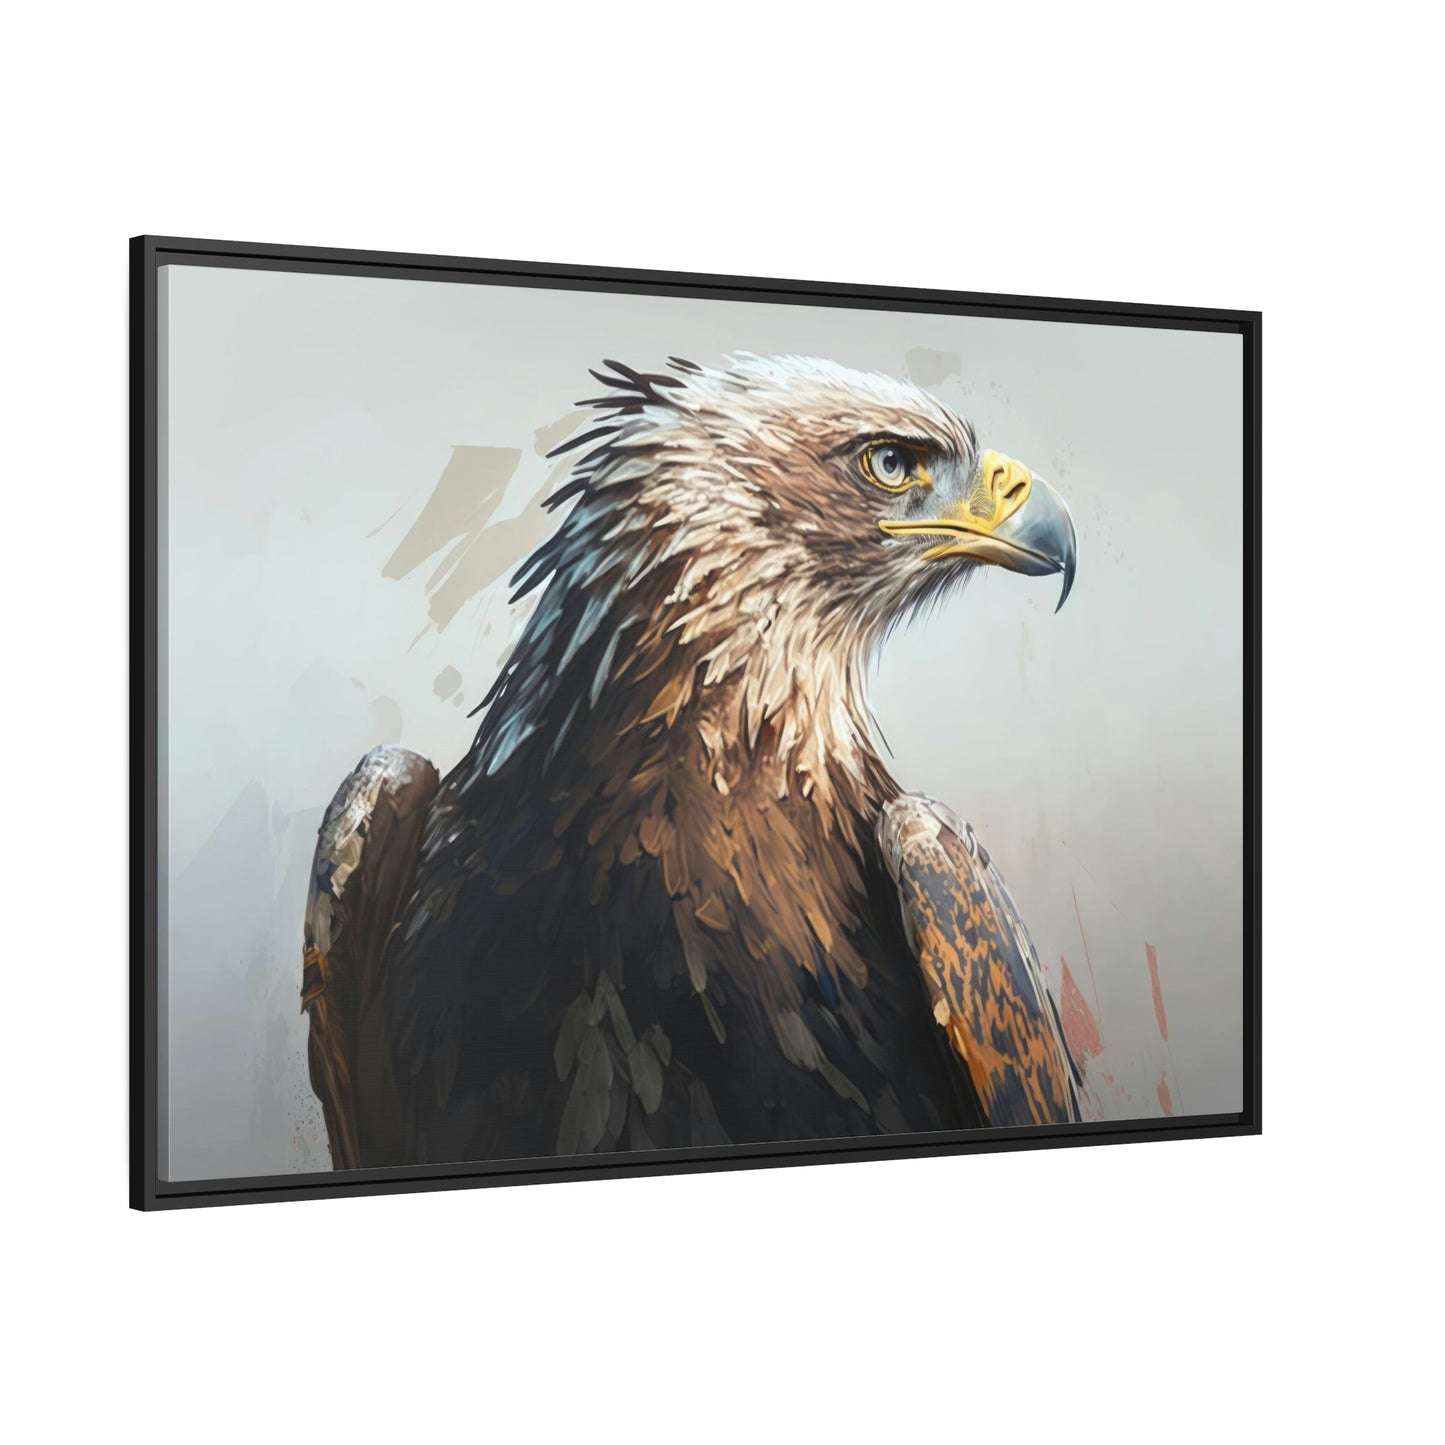 Eagle's Harmonious Flight: Canvas Print, Enveloping with Serenity and Power